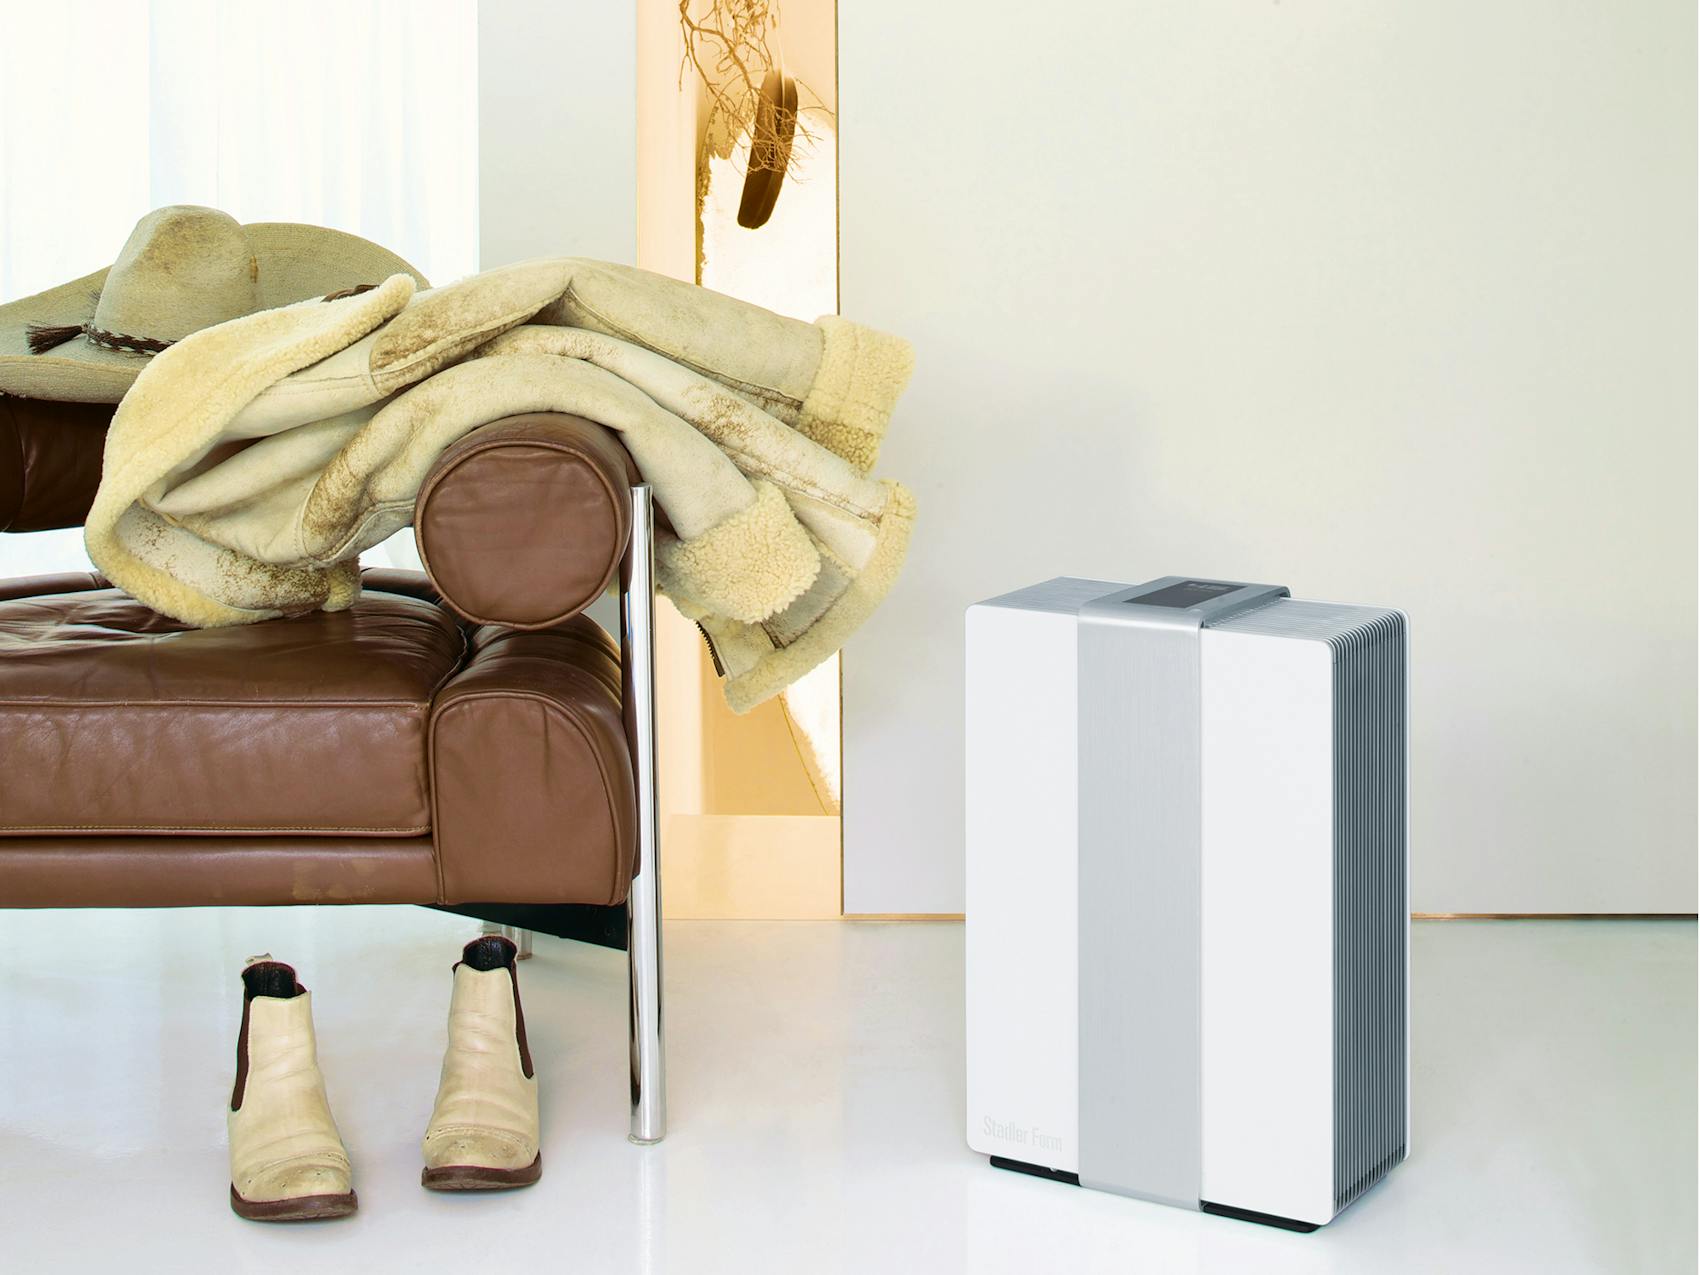 Robert air washer by Stadler Form in silver next to a armchair